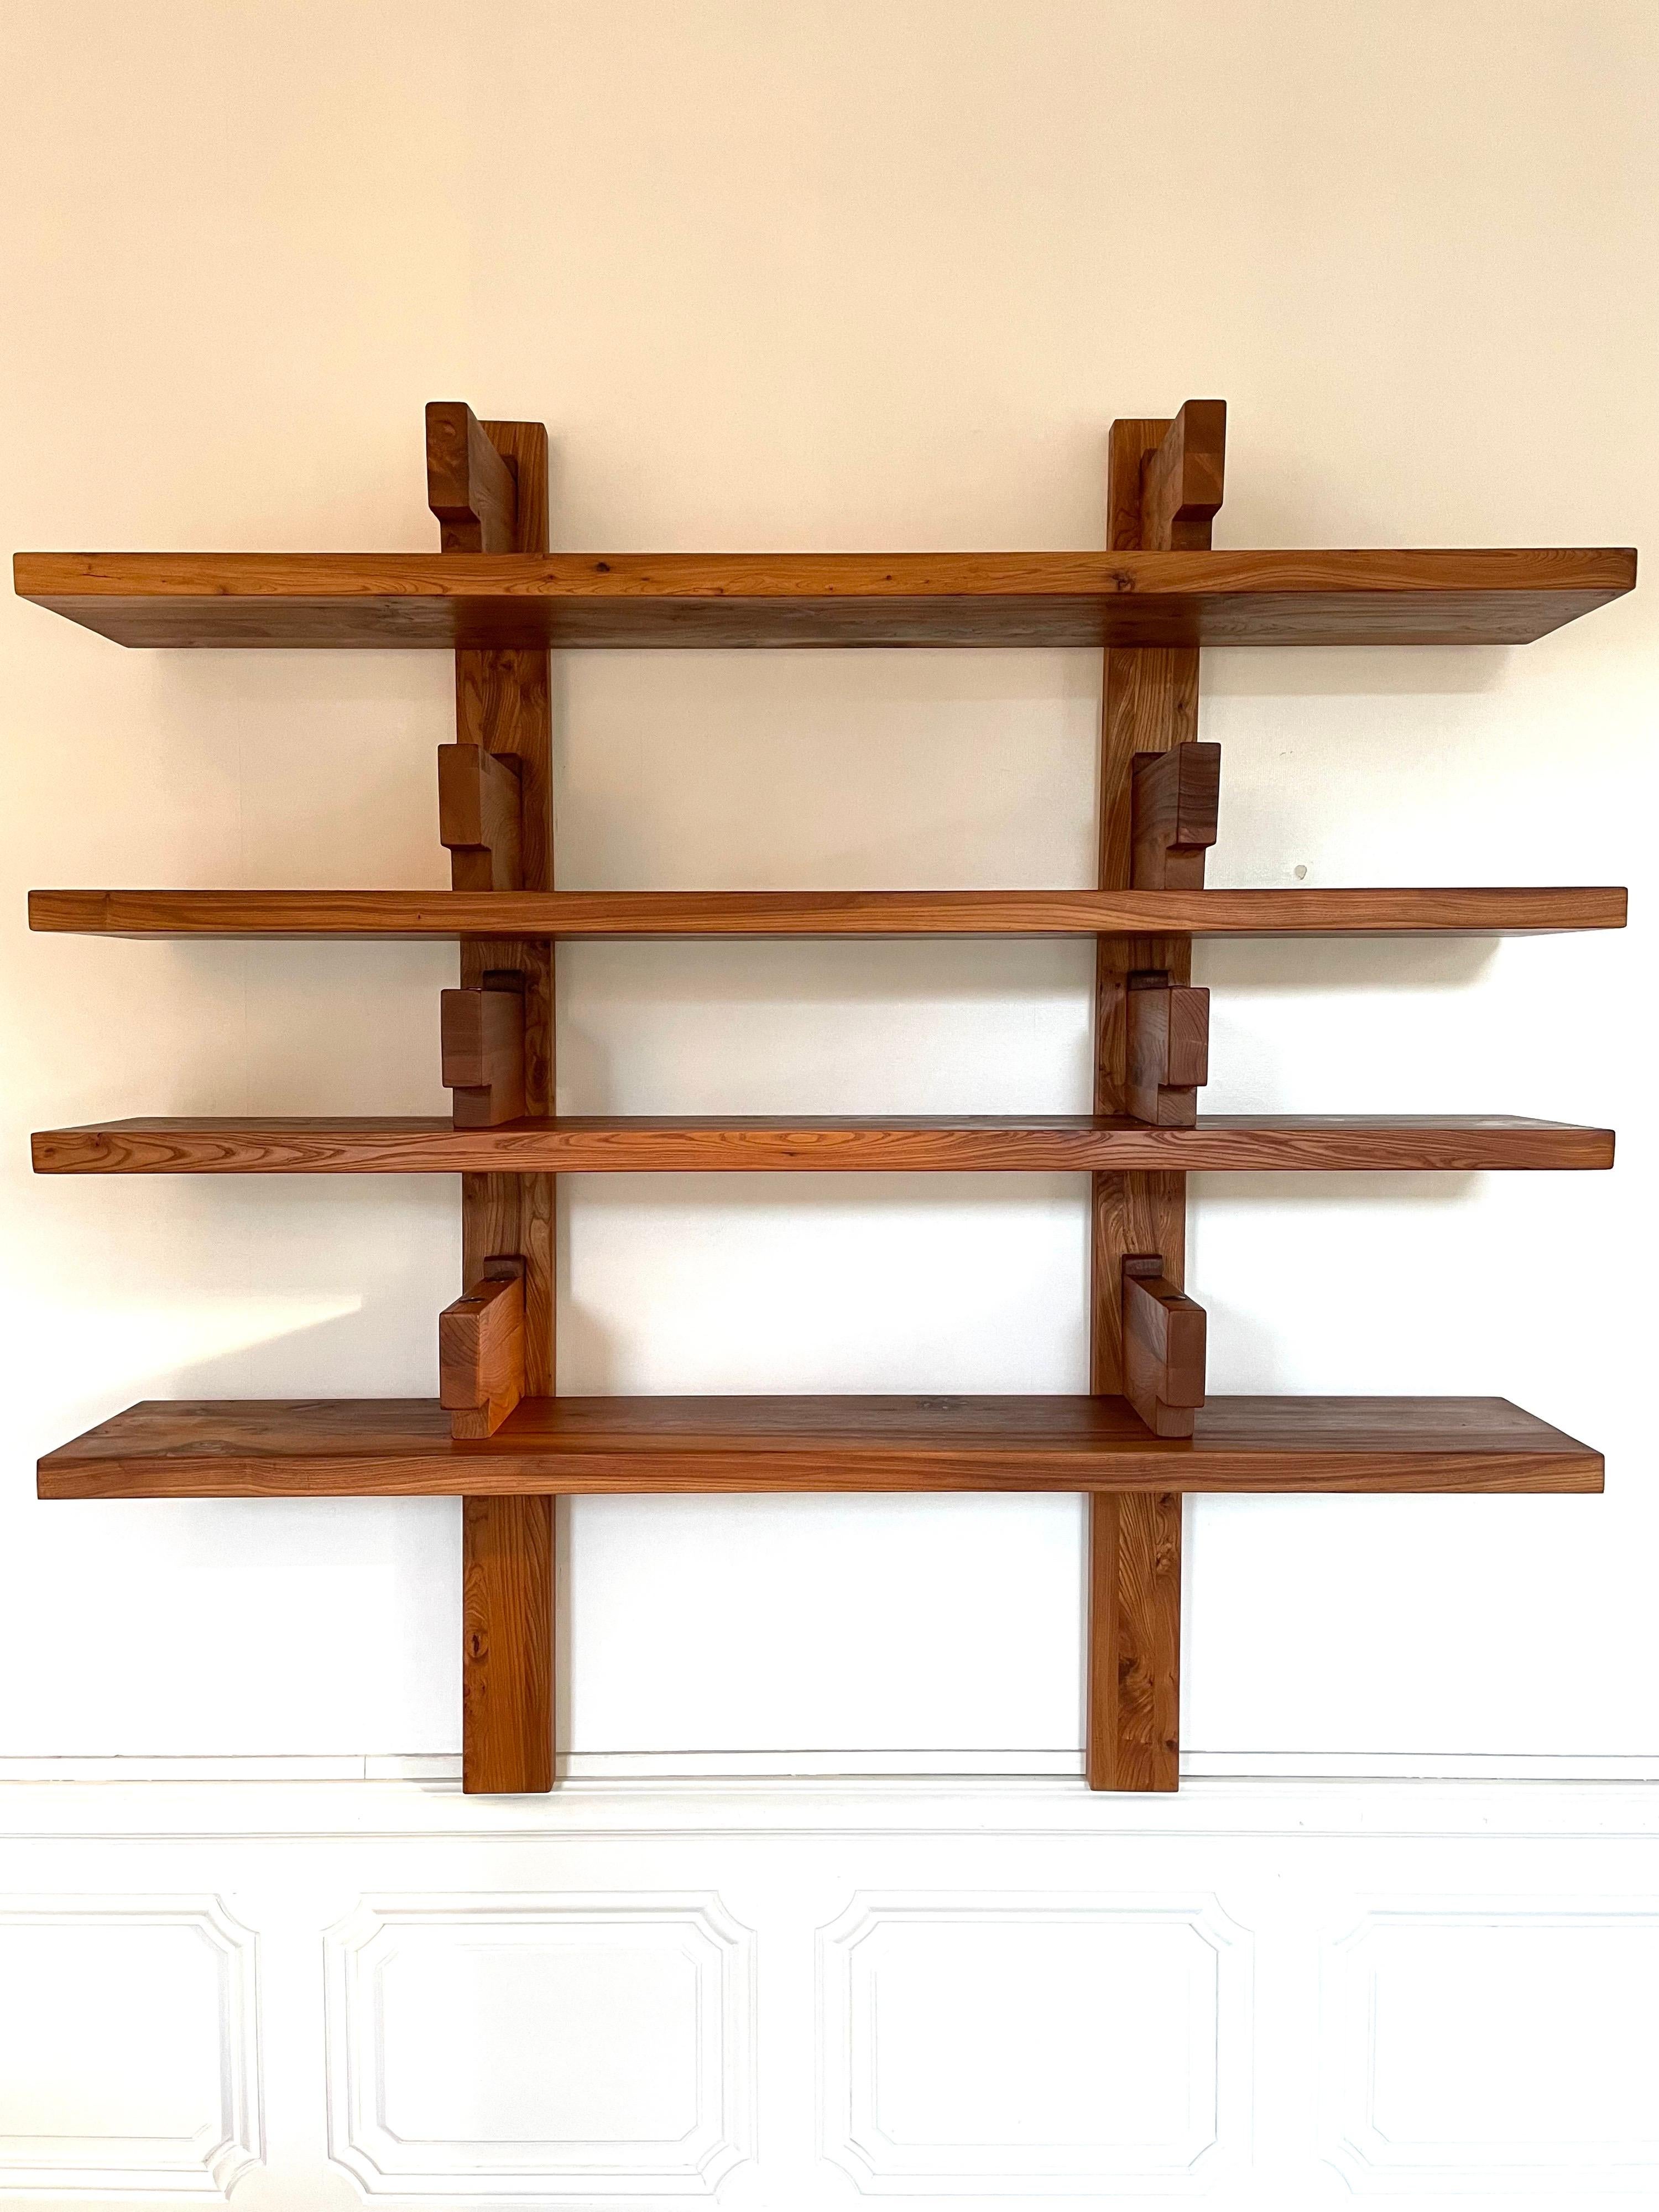 Bookshelf B17 A by Pierre Chapo from 1970 in French Elm 1st edition.

Four shelves, fixed below eight consoles which wedge the books by Brass headed screws, the two vertical uprights carry on the floor their fixing to the wall does not support the